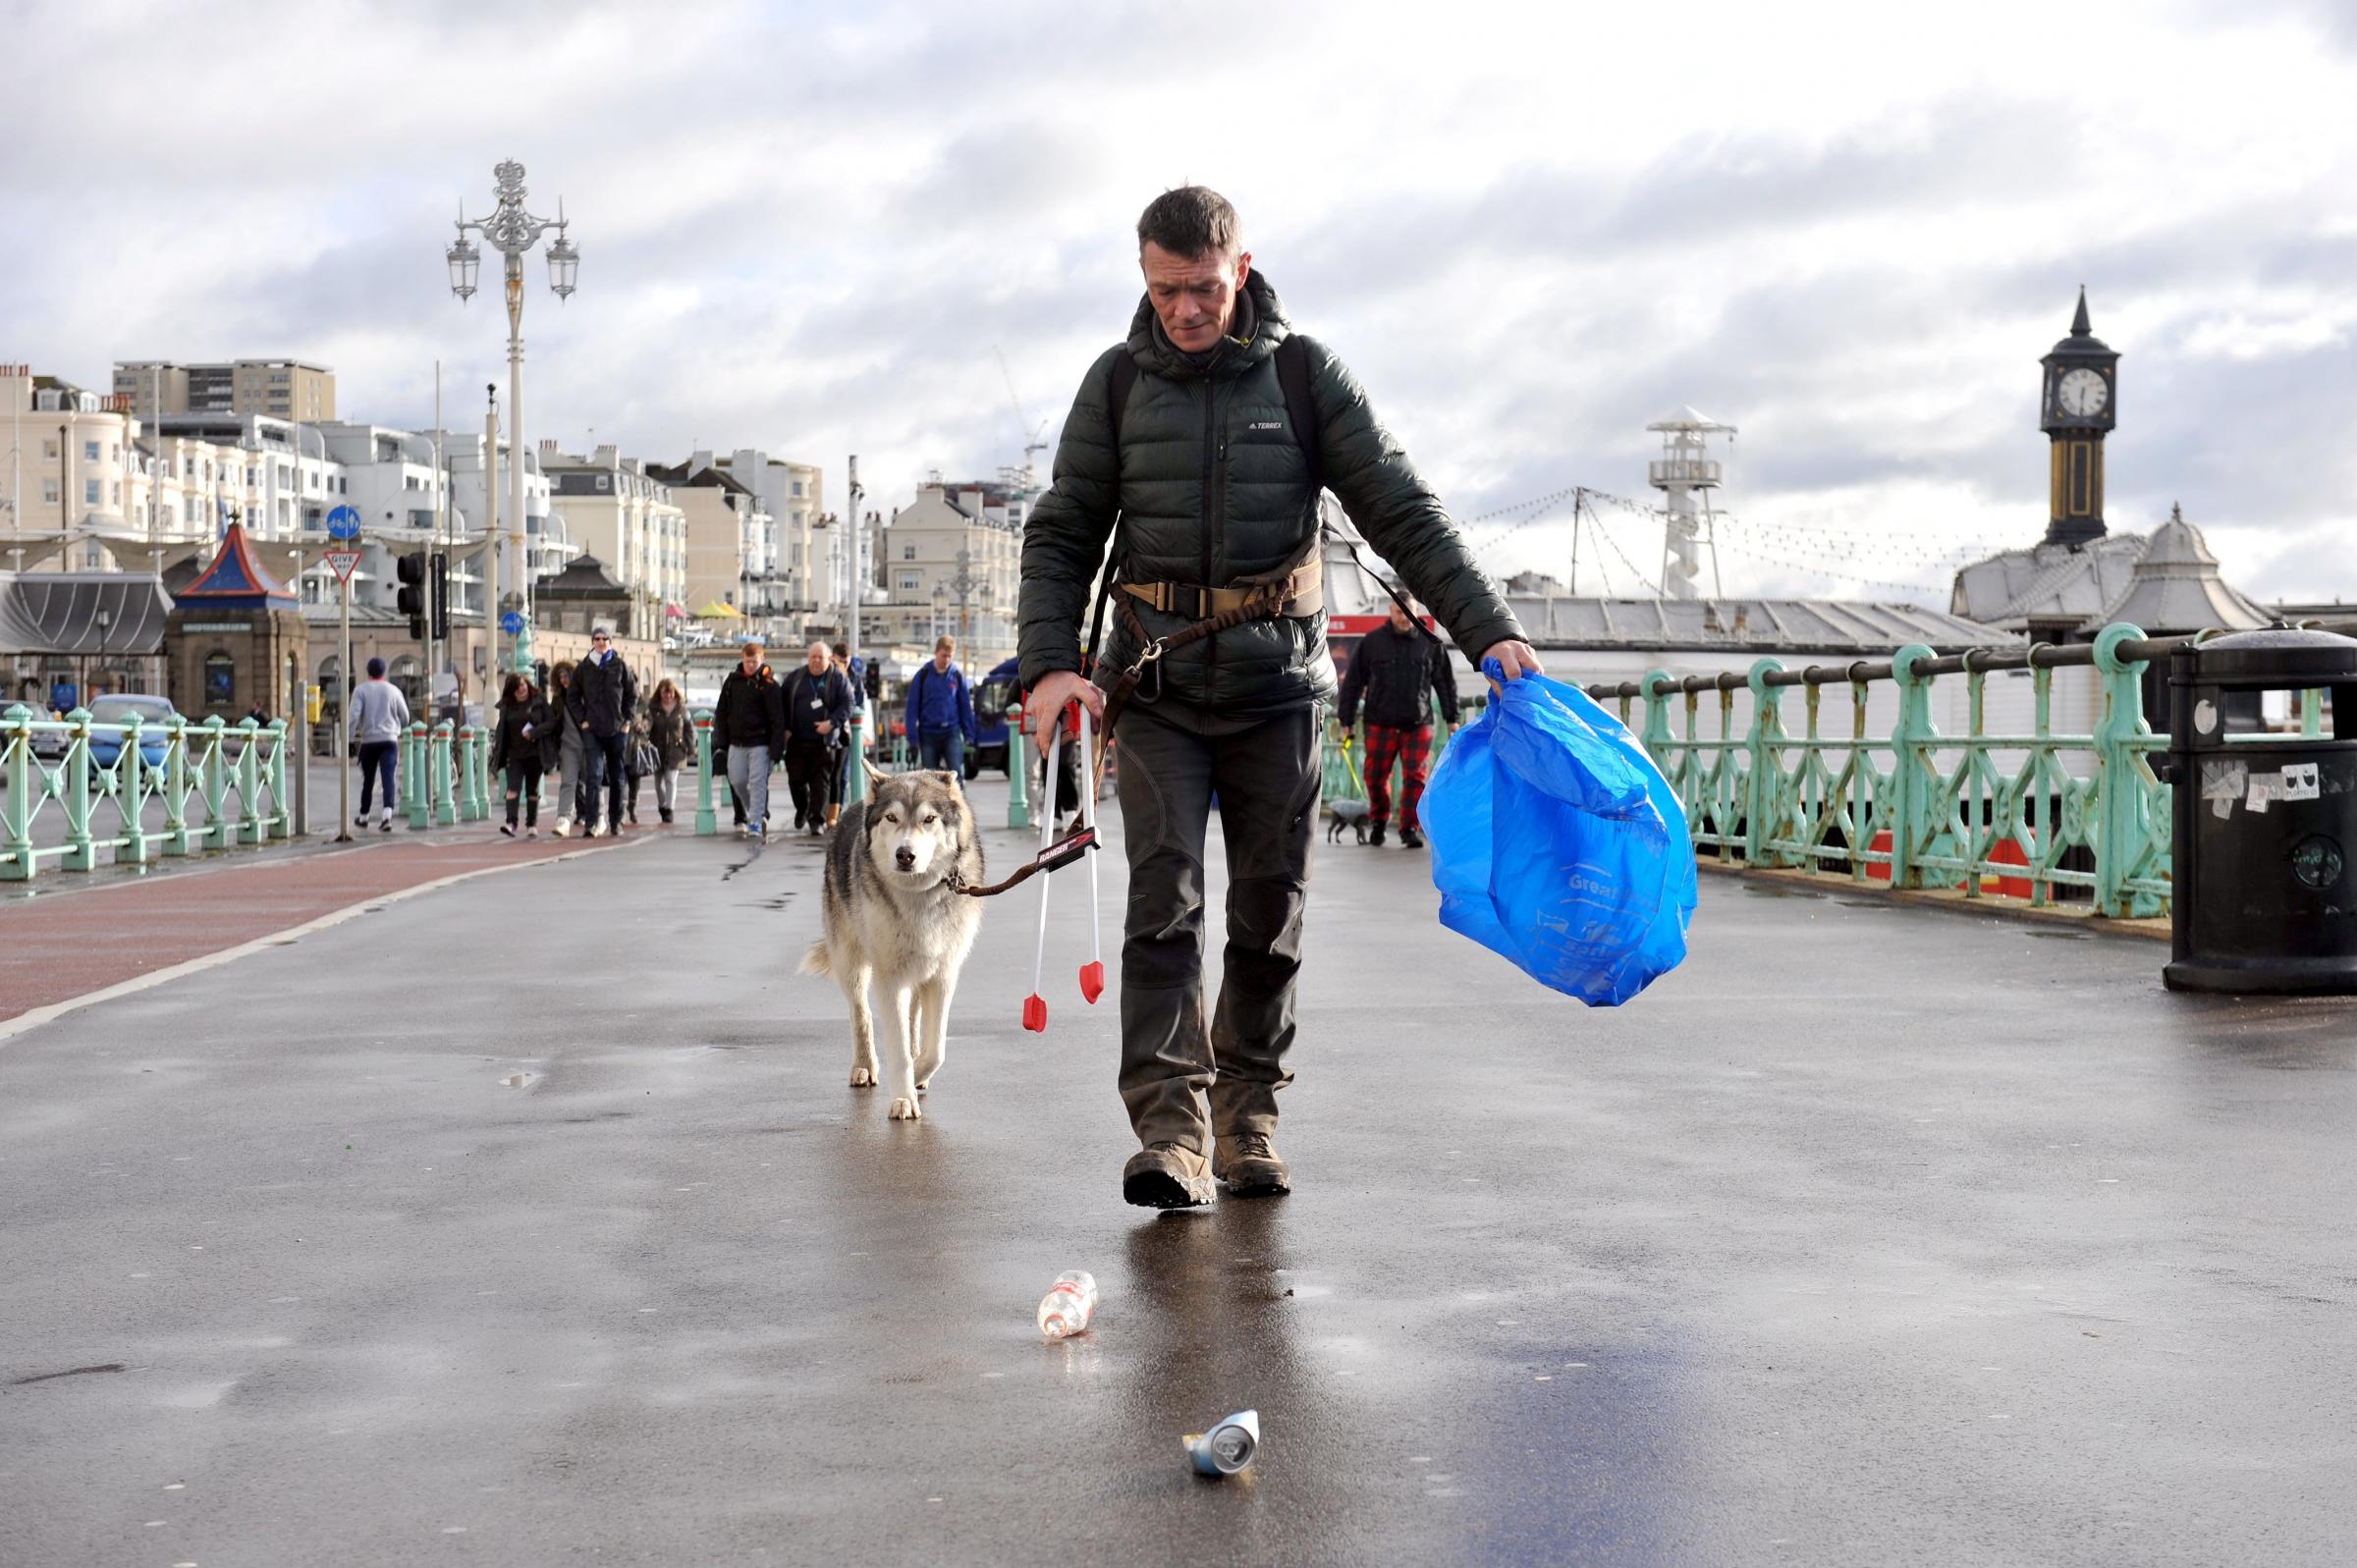 Wayne Dixon - KeepBritain Tidy (KBT)s most loved ambassador - and his dog Koda in Brighton. In a bid to clean up the beaches ahead of the UKs biggest annual litter clean-up campaign, the Great British Spring Clean that is back for another round in